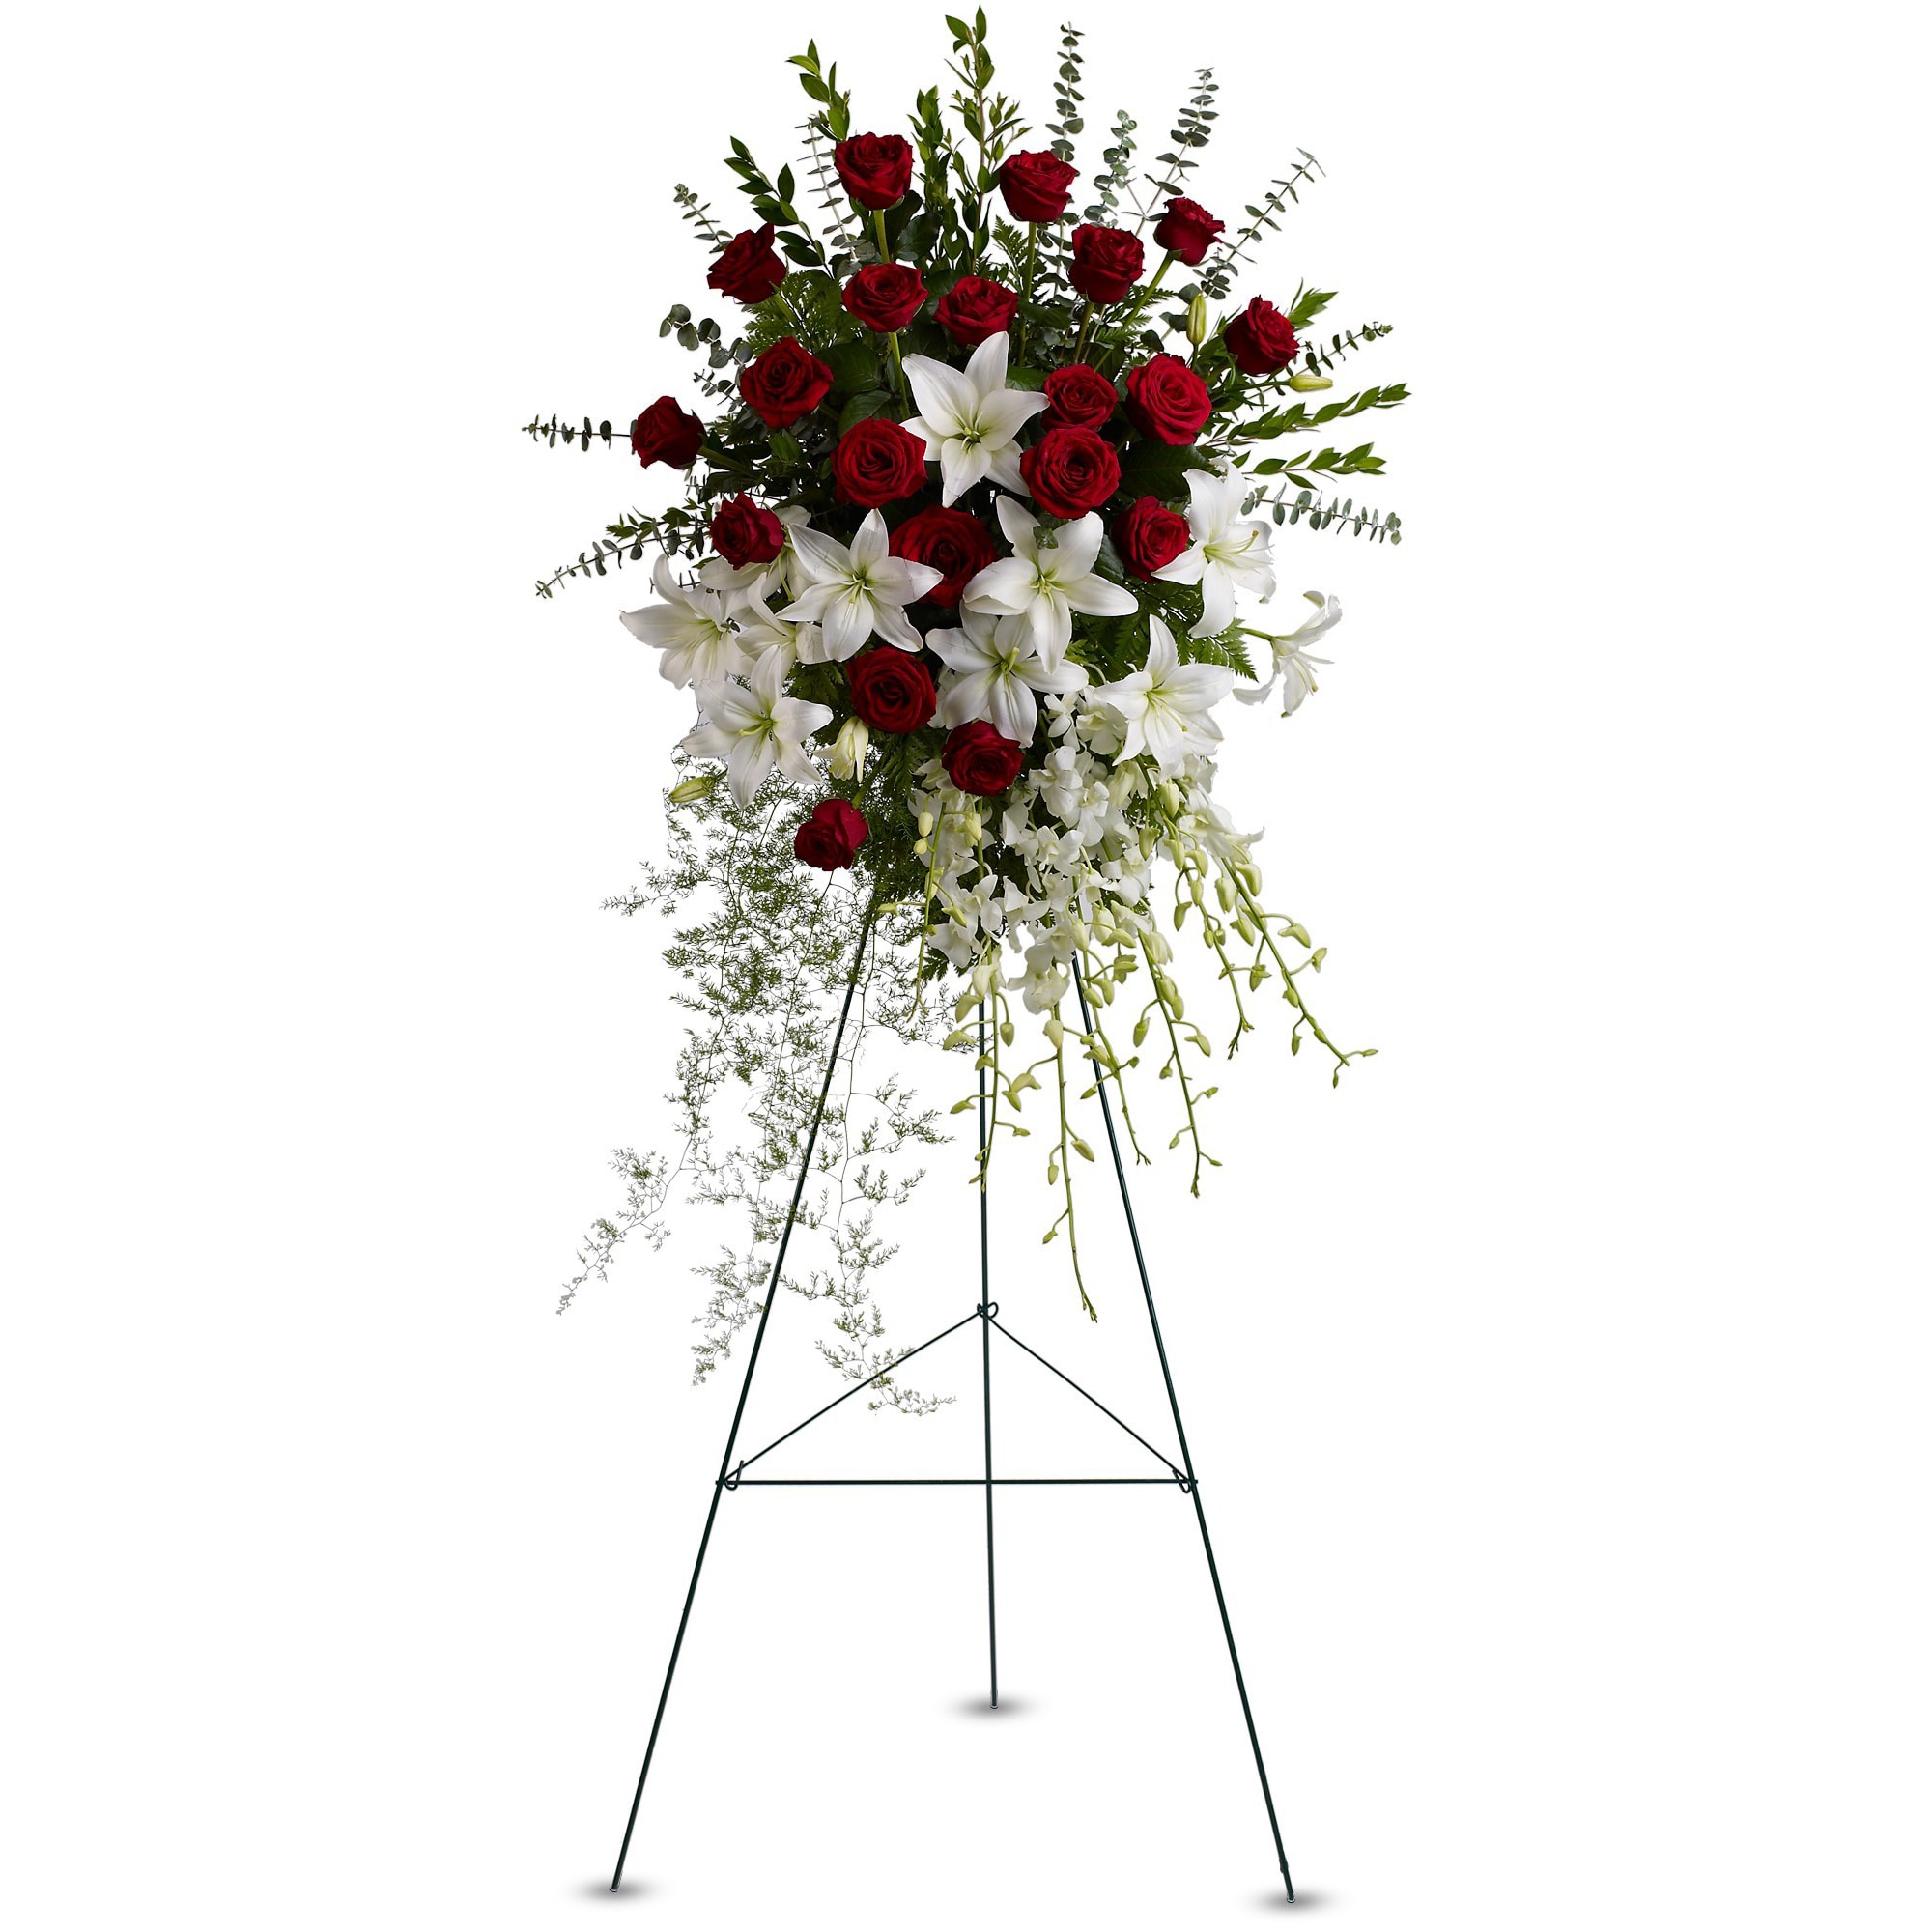 Lily and Rose Tribute Spray  - Pure white lilies and dendrobium orchids mingle with red roses, white asiatic lilies and more in this magnificent and impressive standing spray of the finest blooms. A fitting tribute for a funeral, wake or memorial service. 